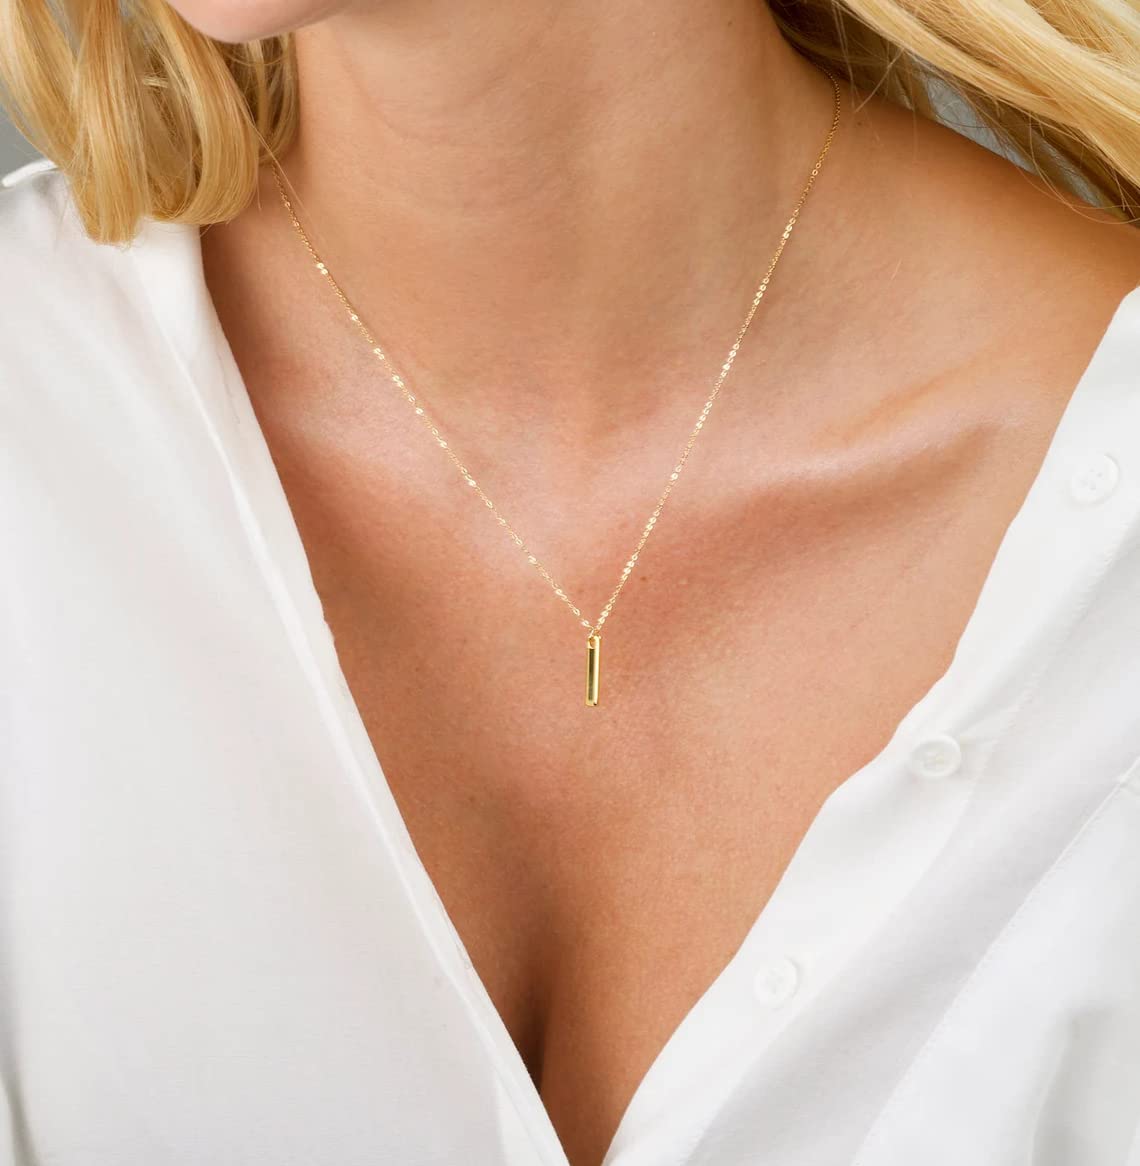 Aghfacy Dainty Bar Necklace for Women | Cute Bar Pendant Choker | Bar Necklace Gold | Tiny Bar Pendant Necklaces | Layered Bar Necklace